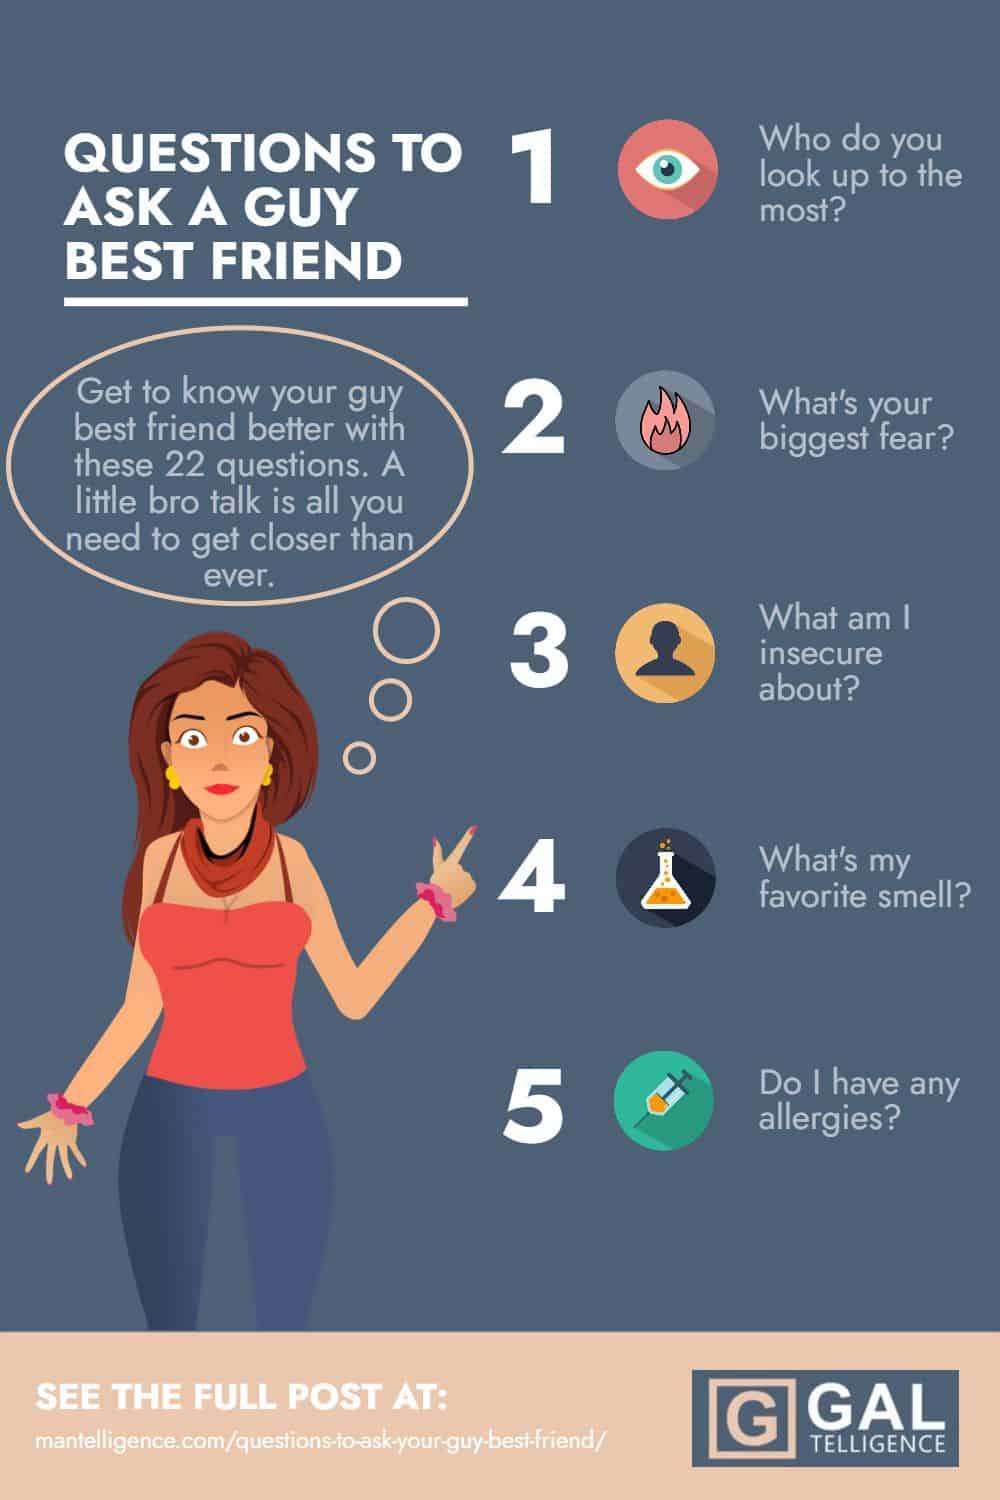 Questions to ask your guy best friend - Infographic